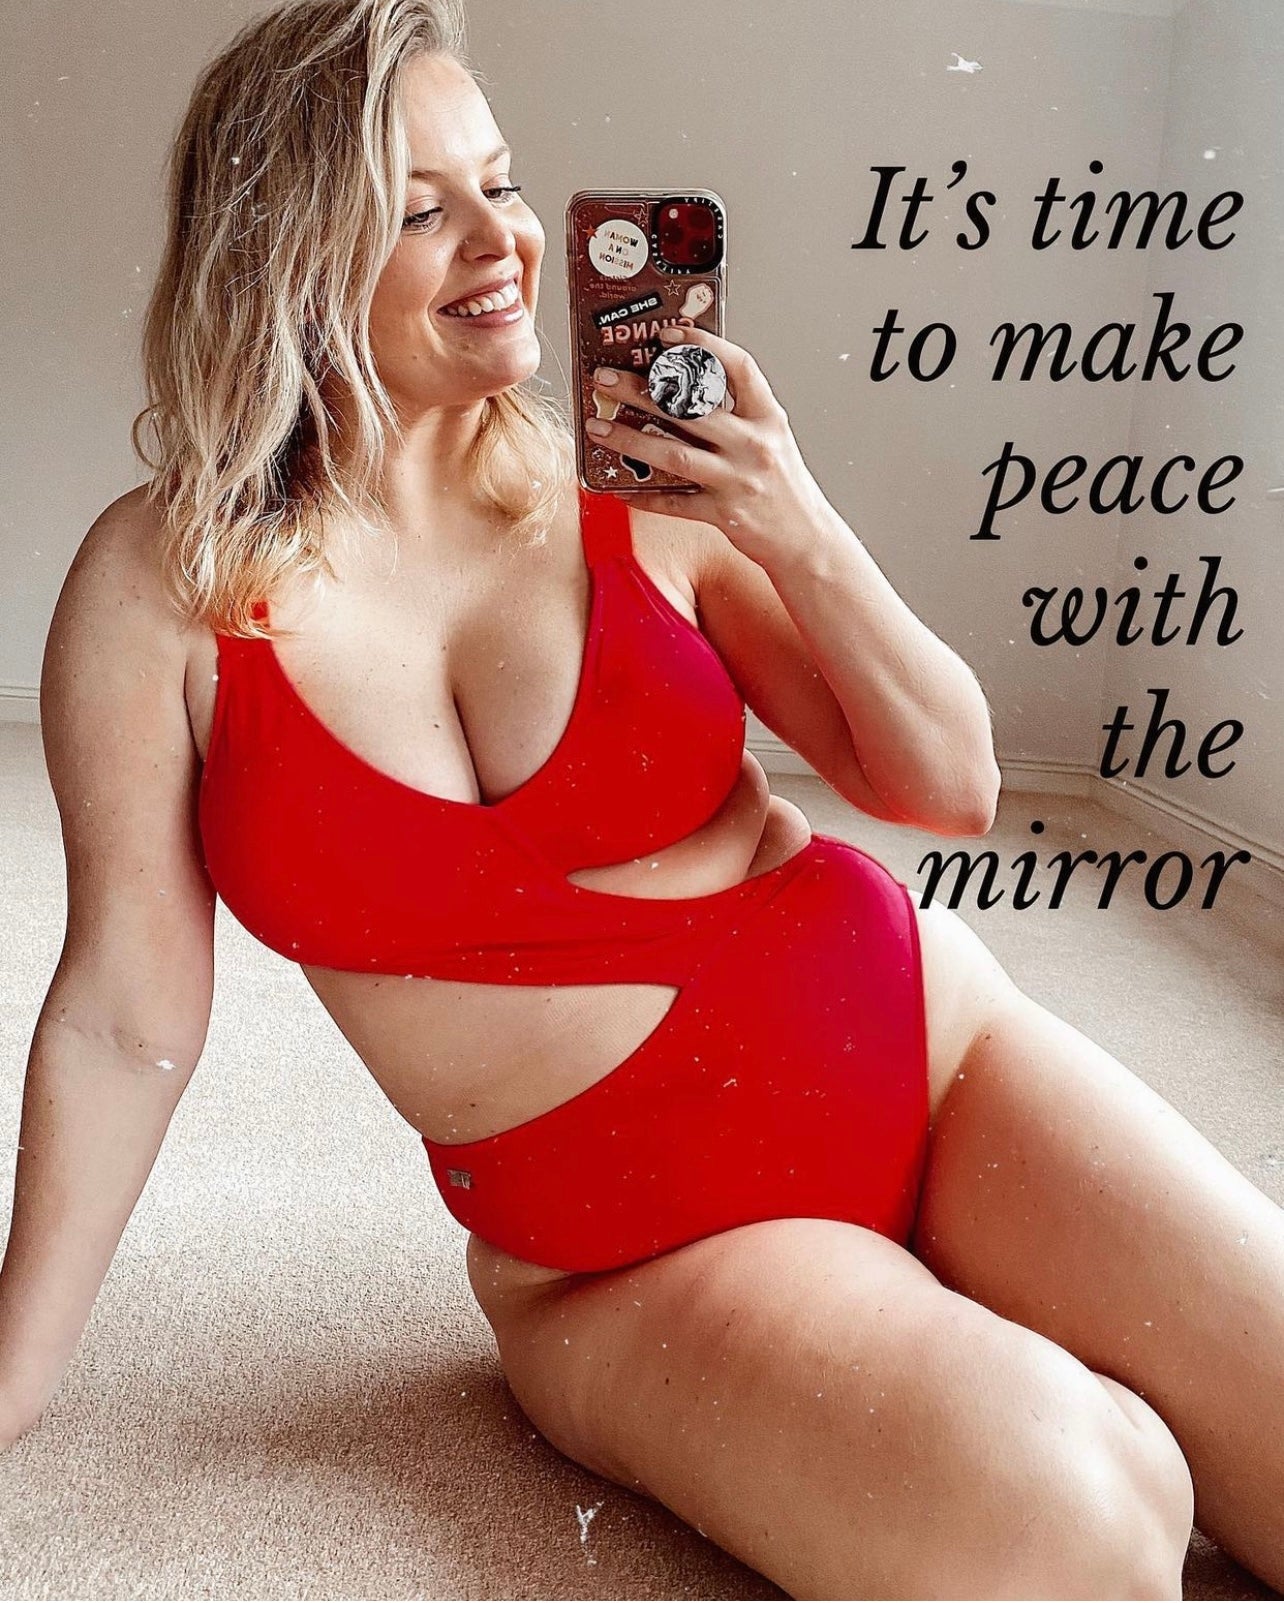 It’s time to make peace with the mirror…